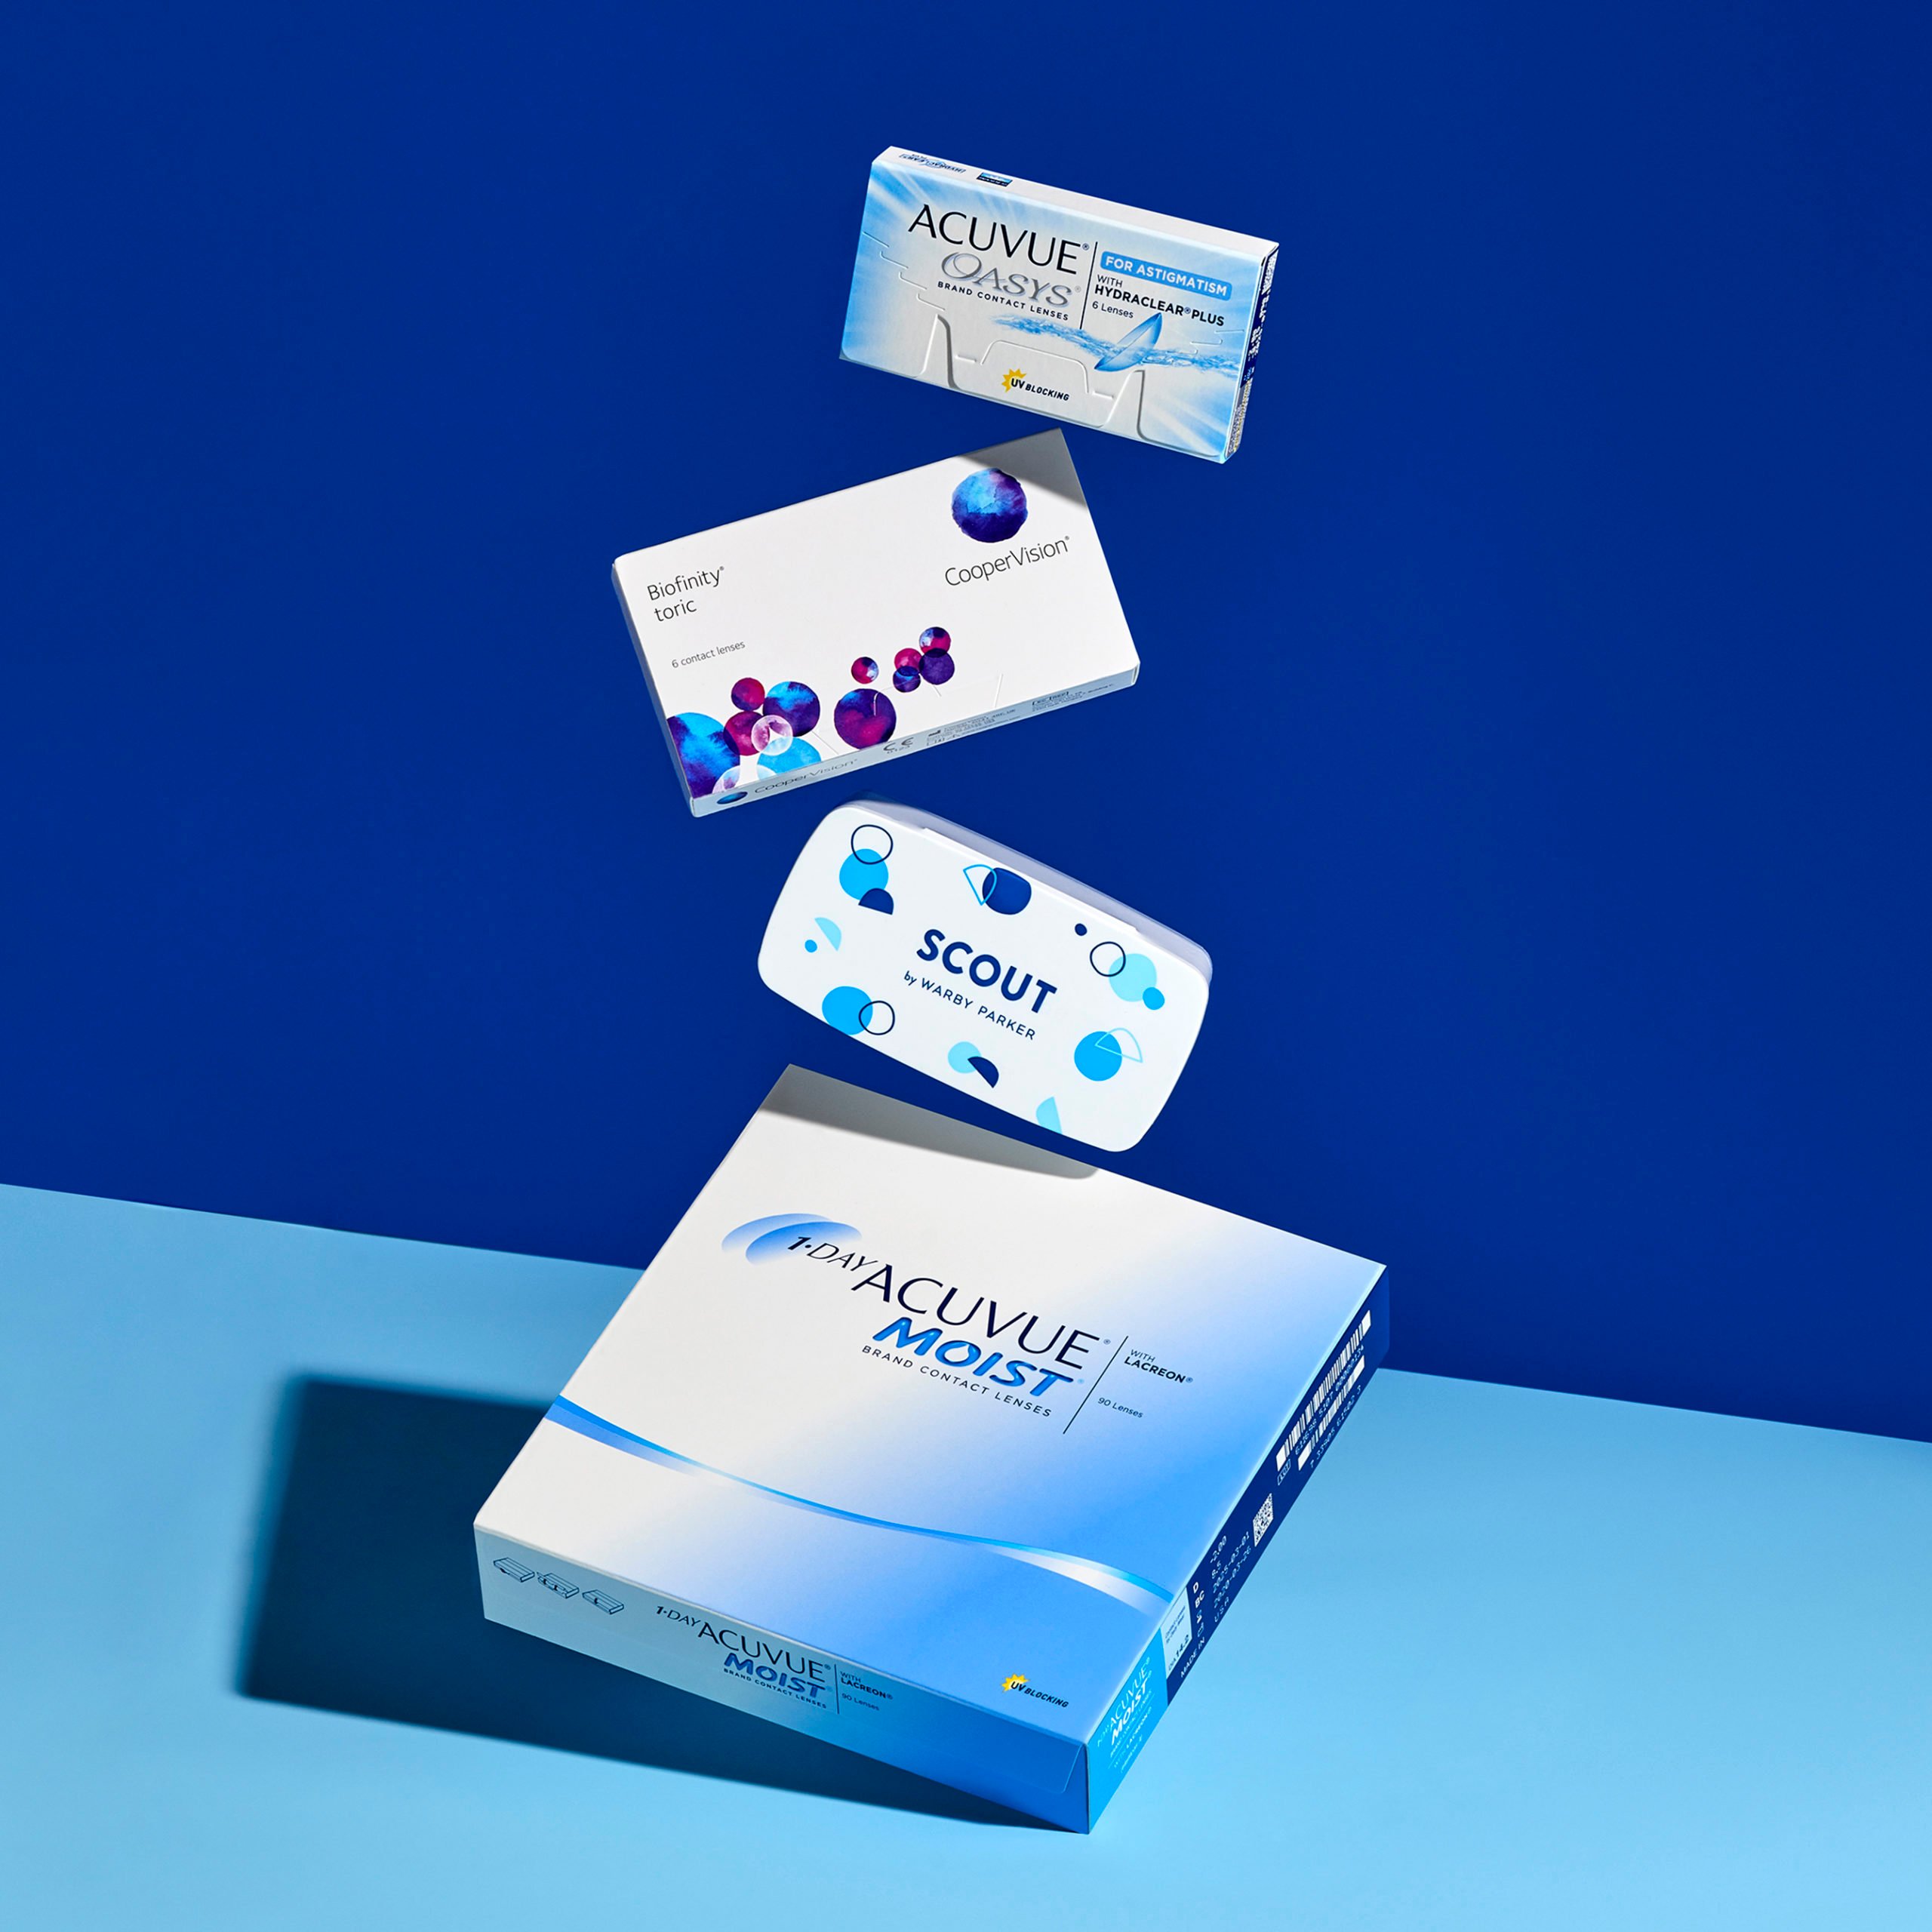 boxes of different contact lens brands